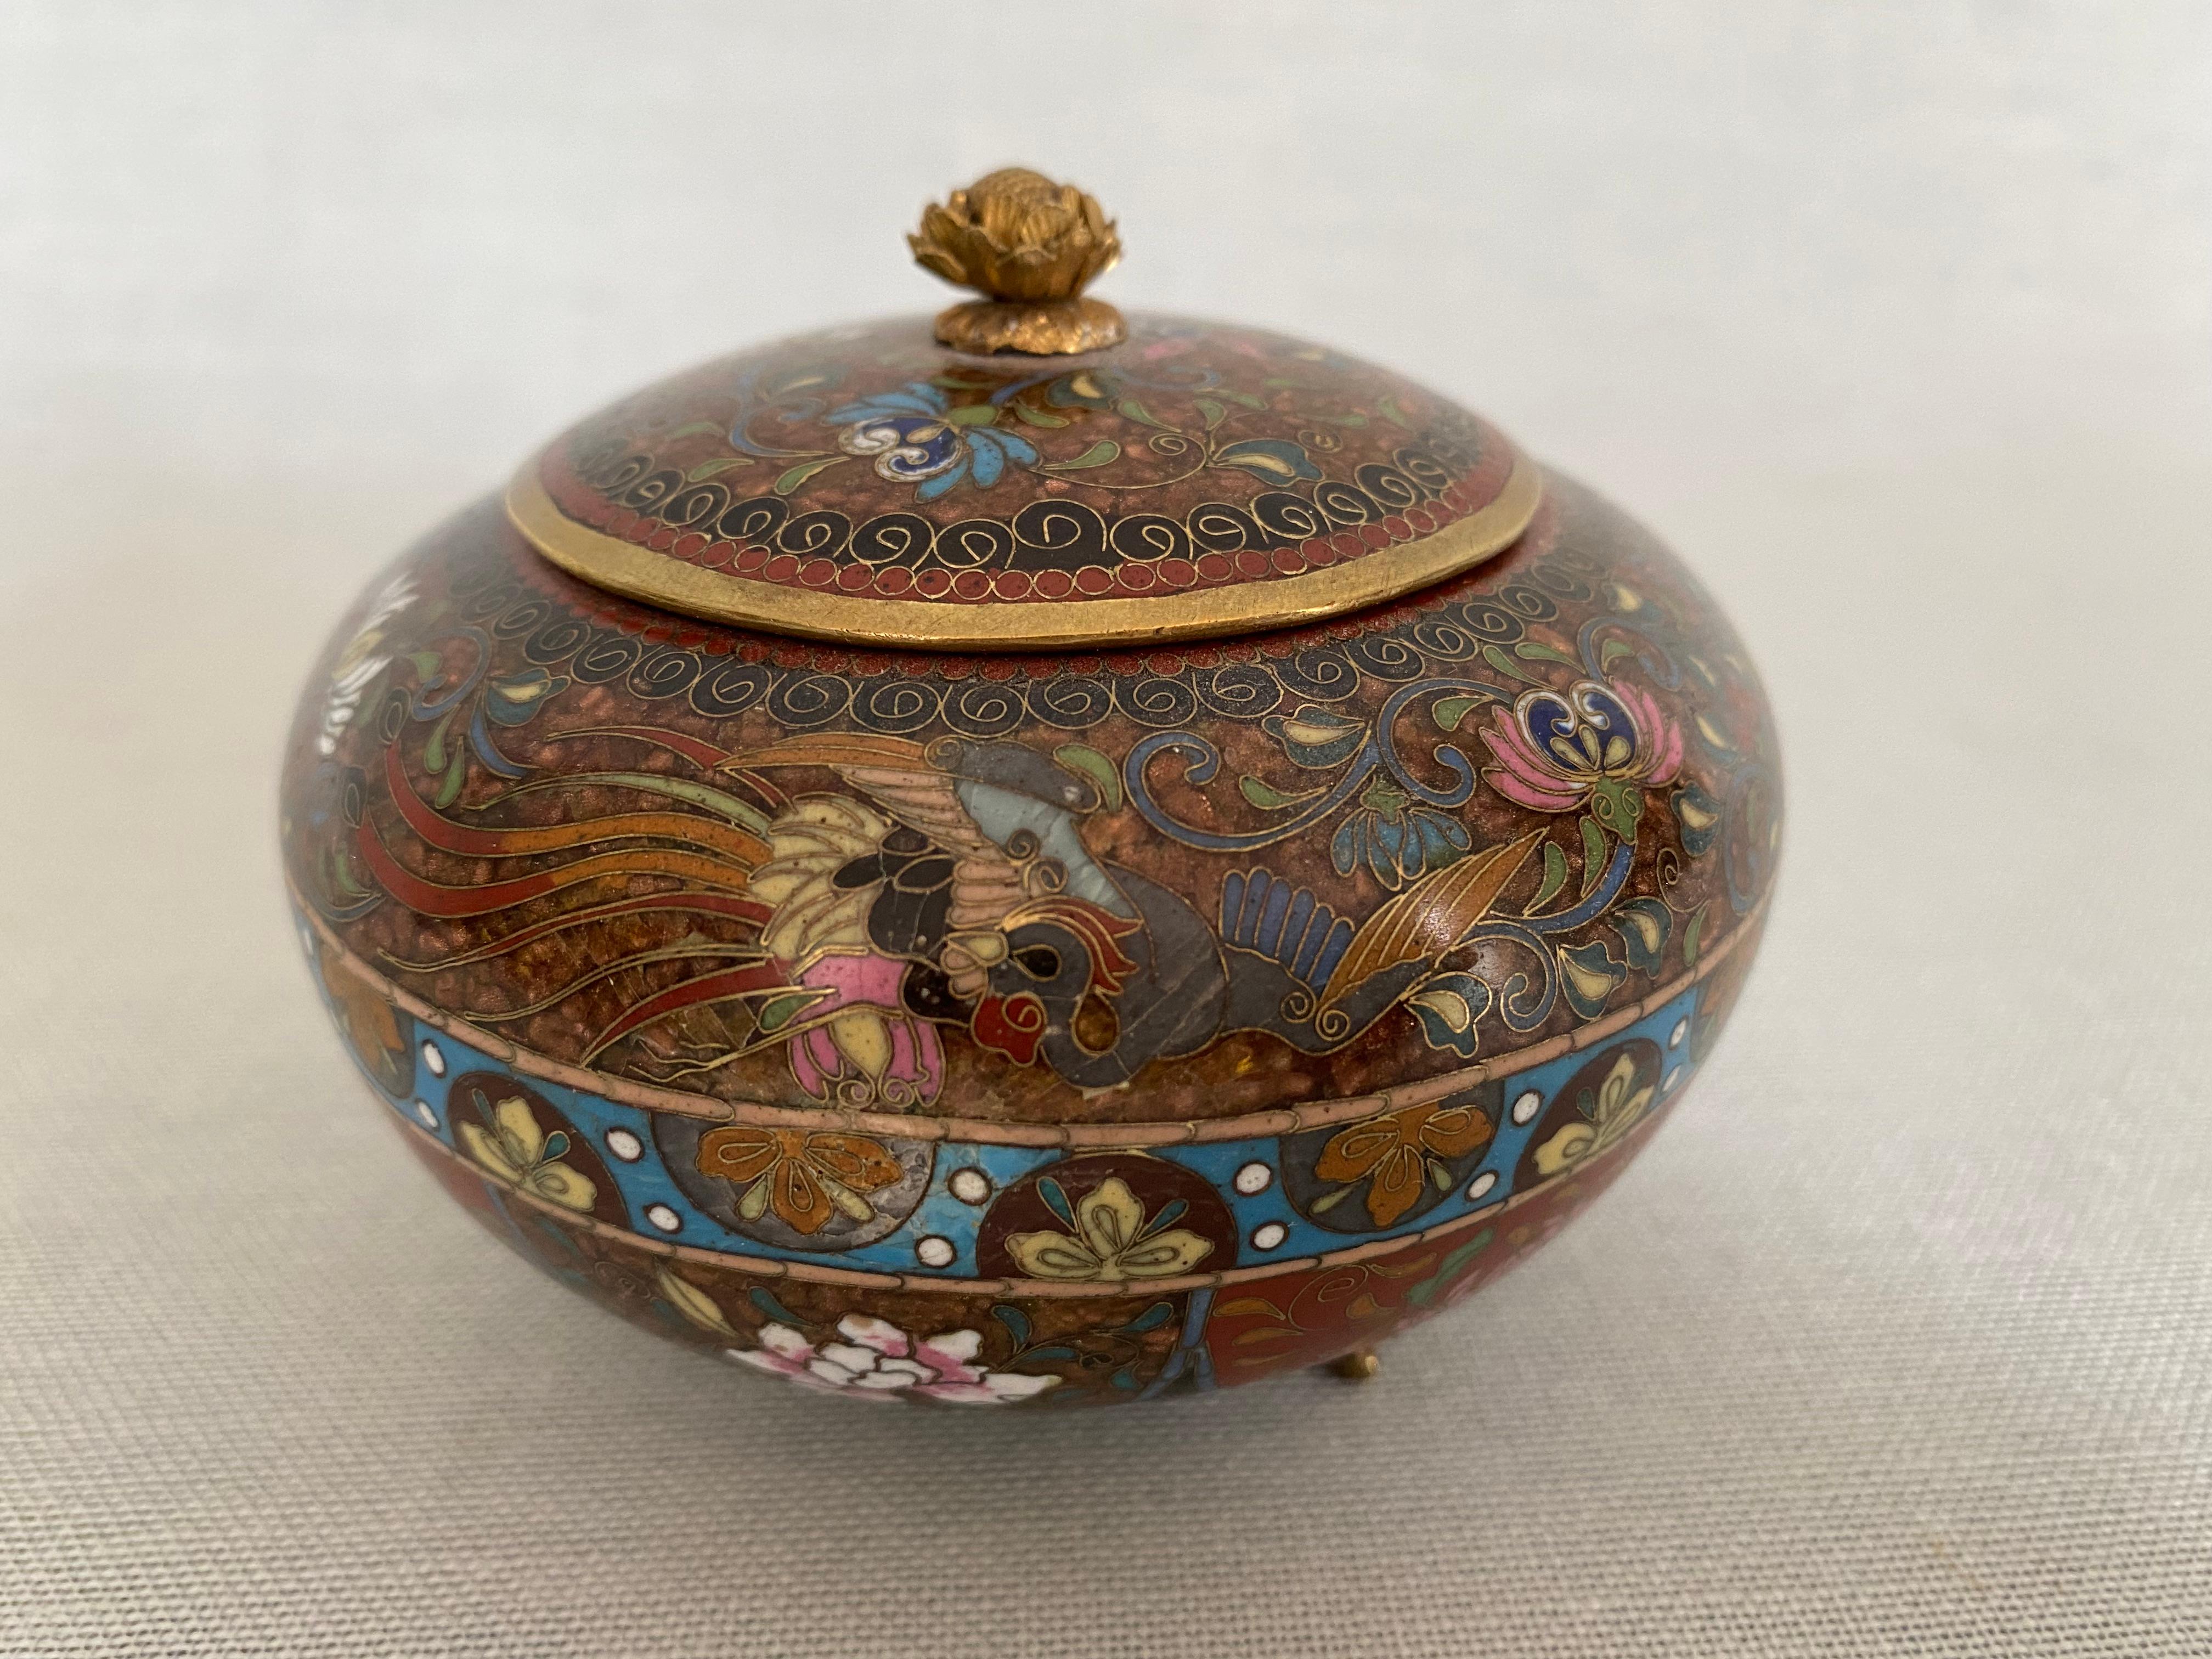 Fine Japanese cloisonne lidded box from the Meiji period. The small box stands on three brass feet. The lid, also made of brass, has a small flower as a handle that is just opening.
The box is richly decorated and finely worked out. A phoenix on a